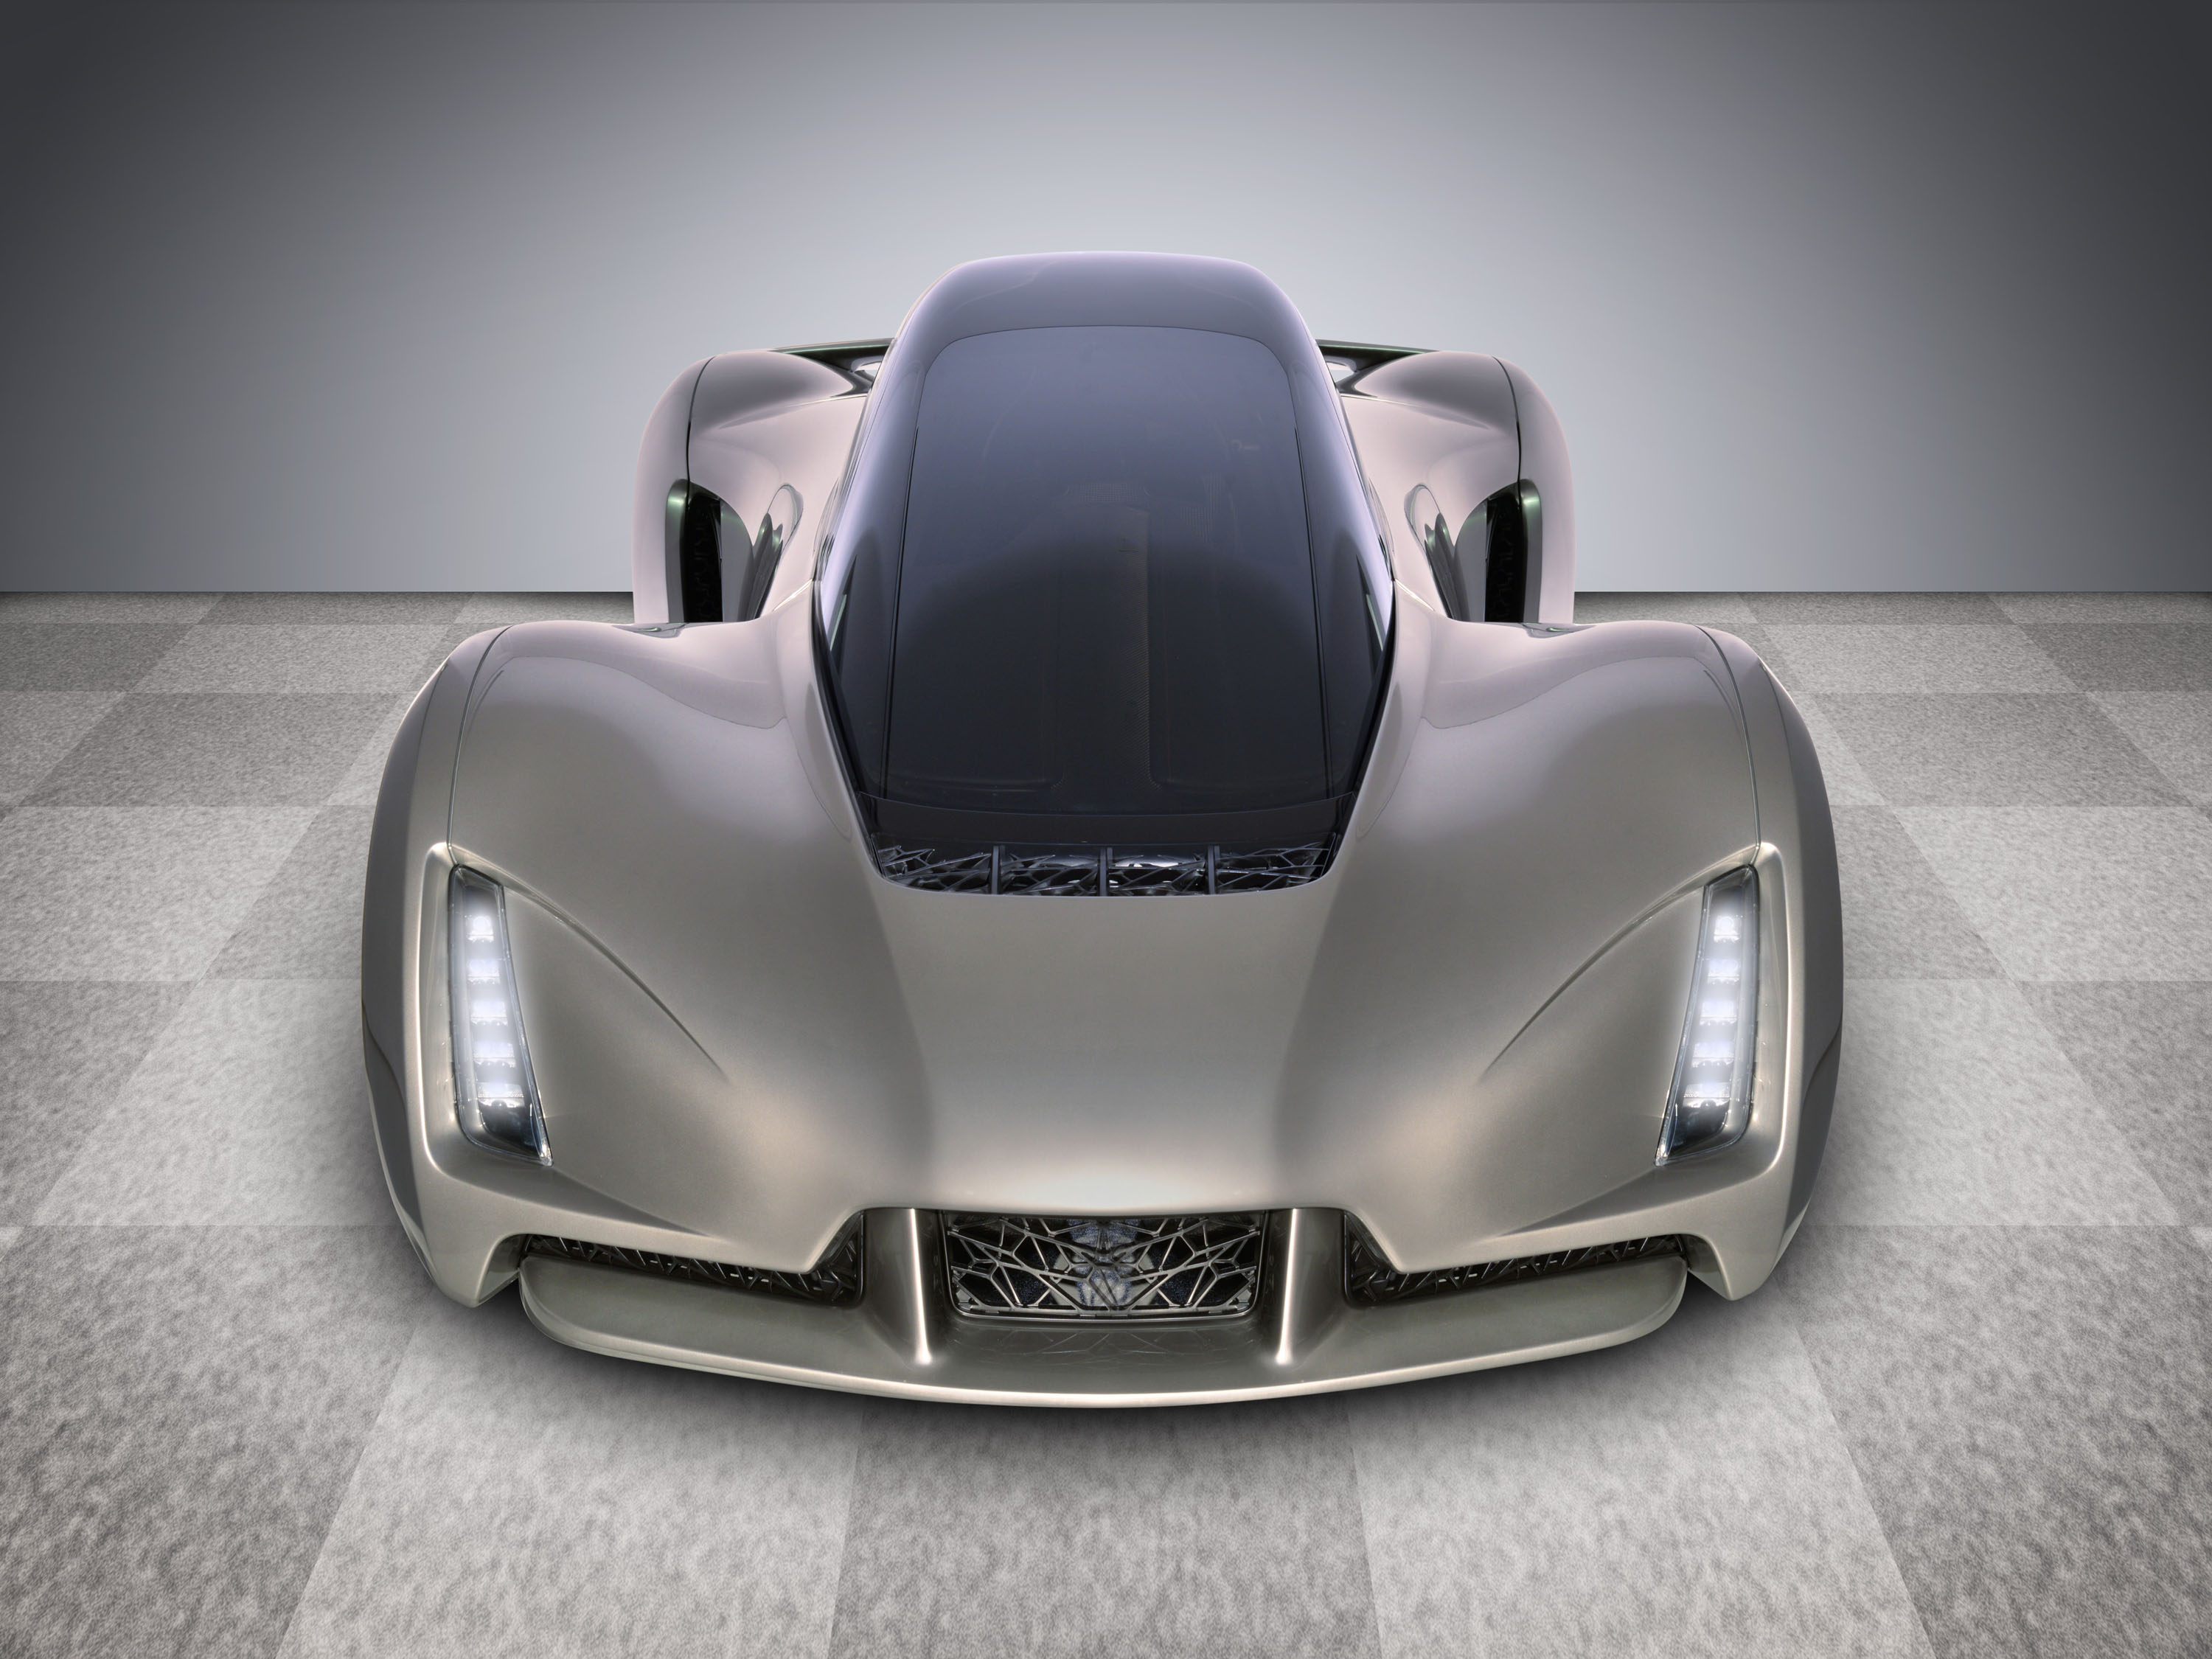 Automotive industry uses 3D printed car parts.